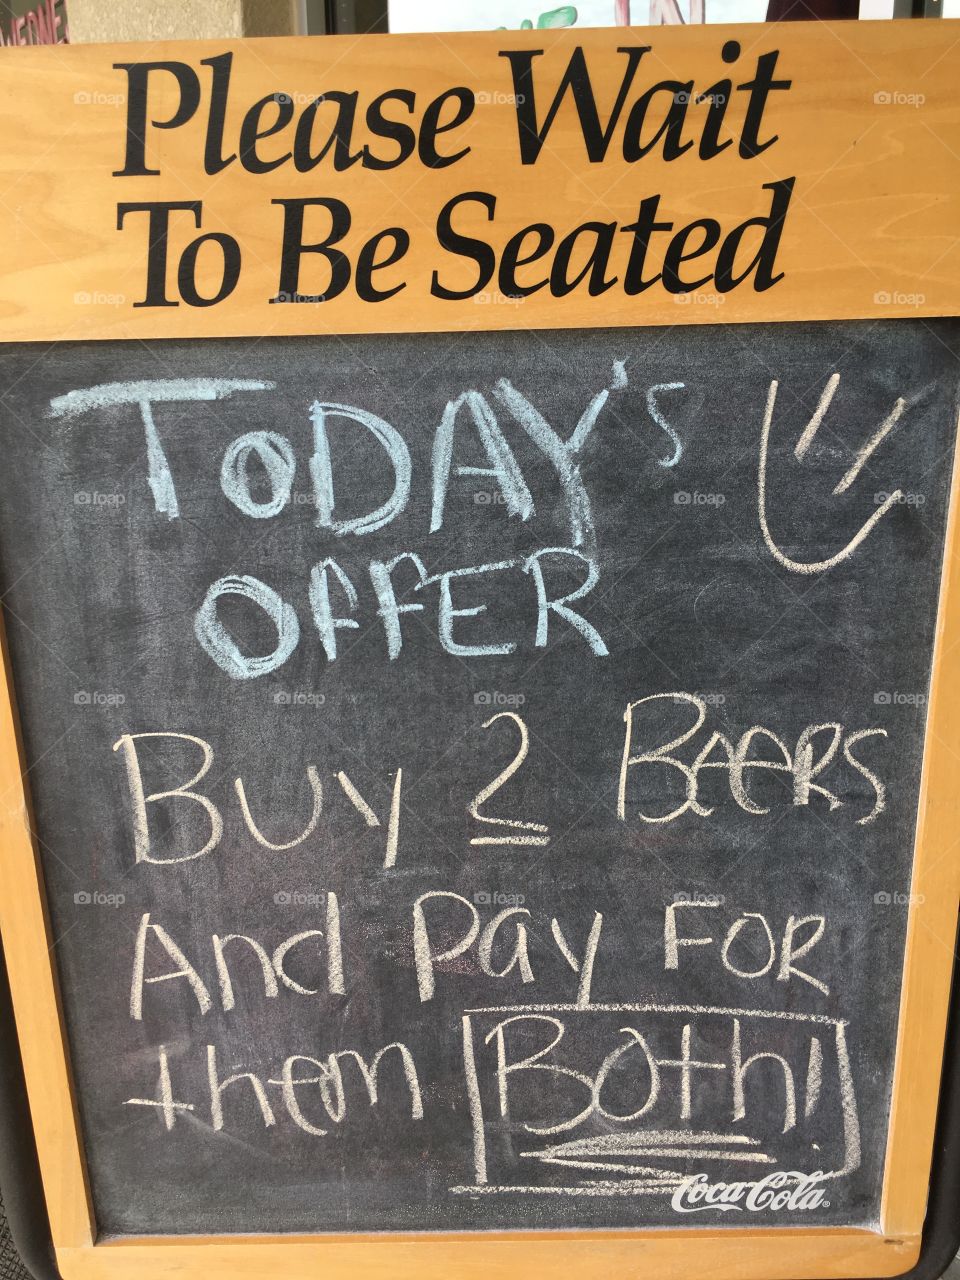 Today only but 2 beers and pay for them both!